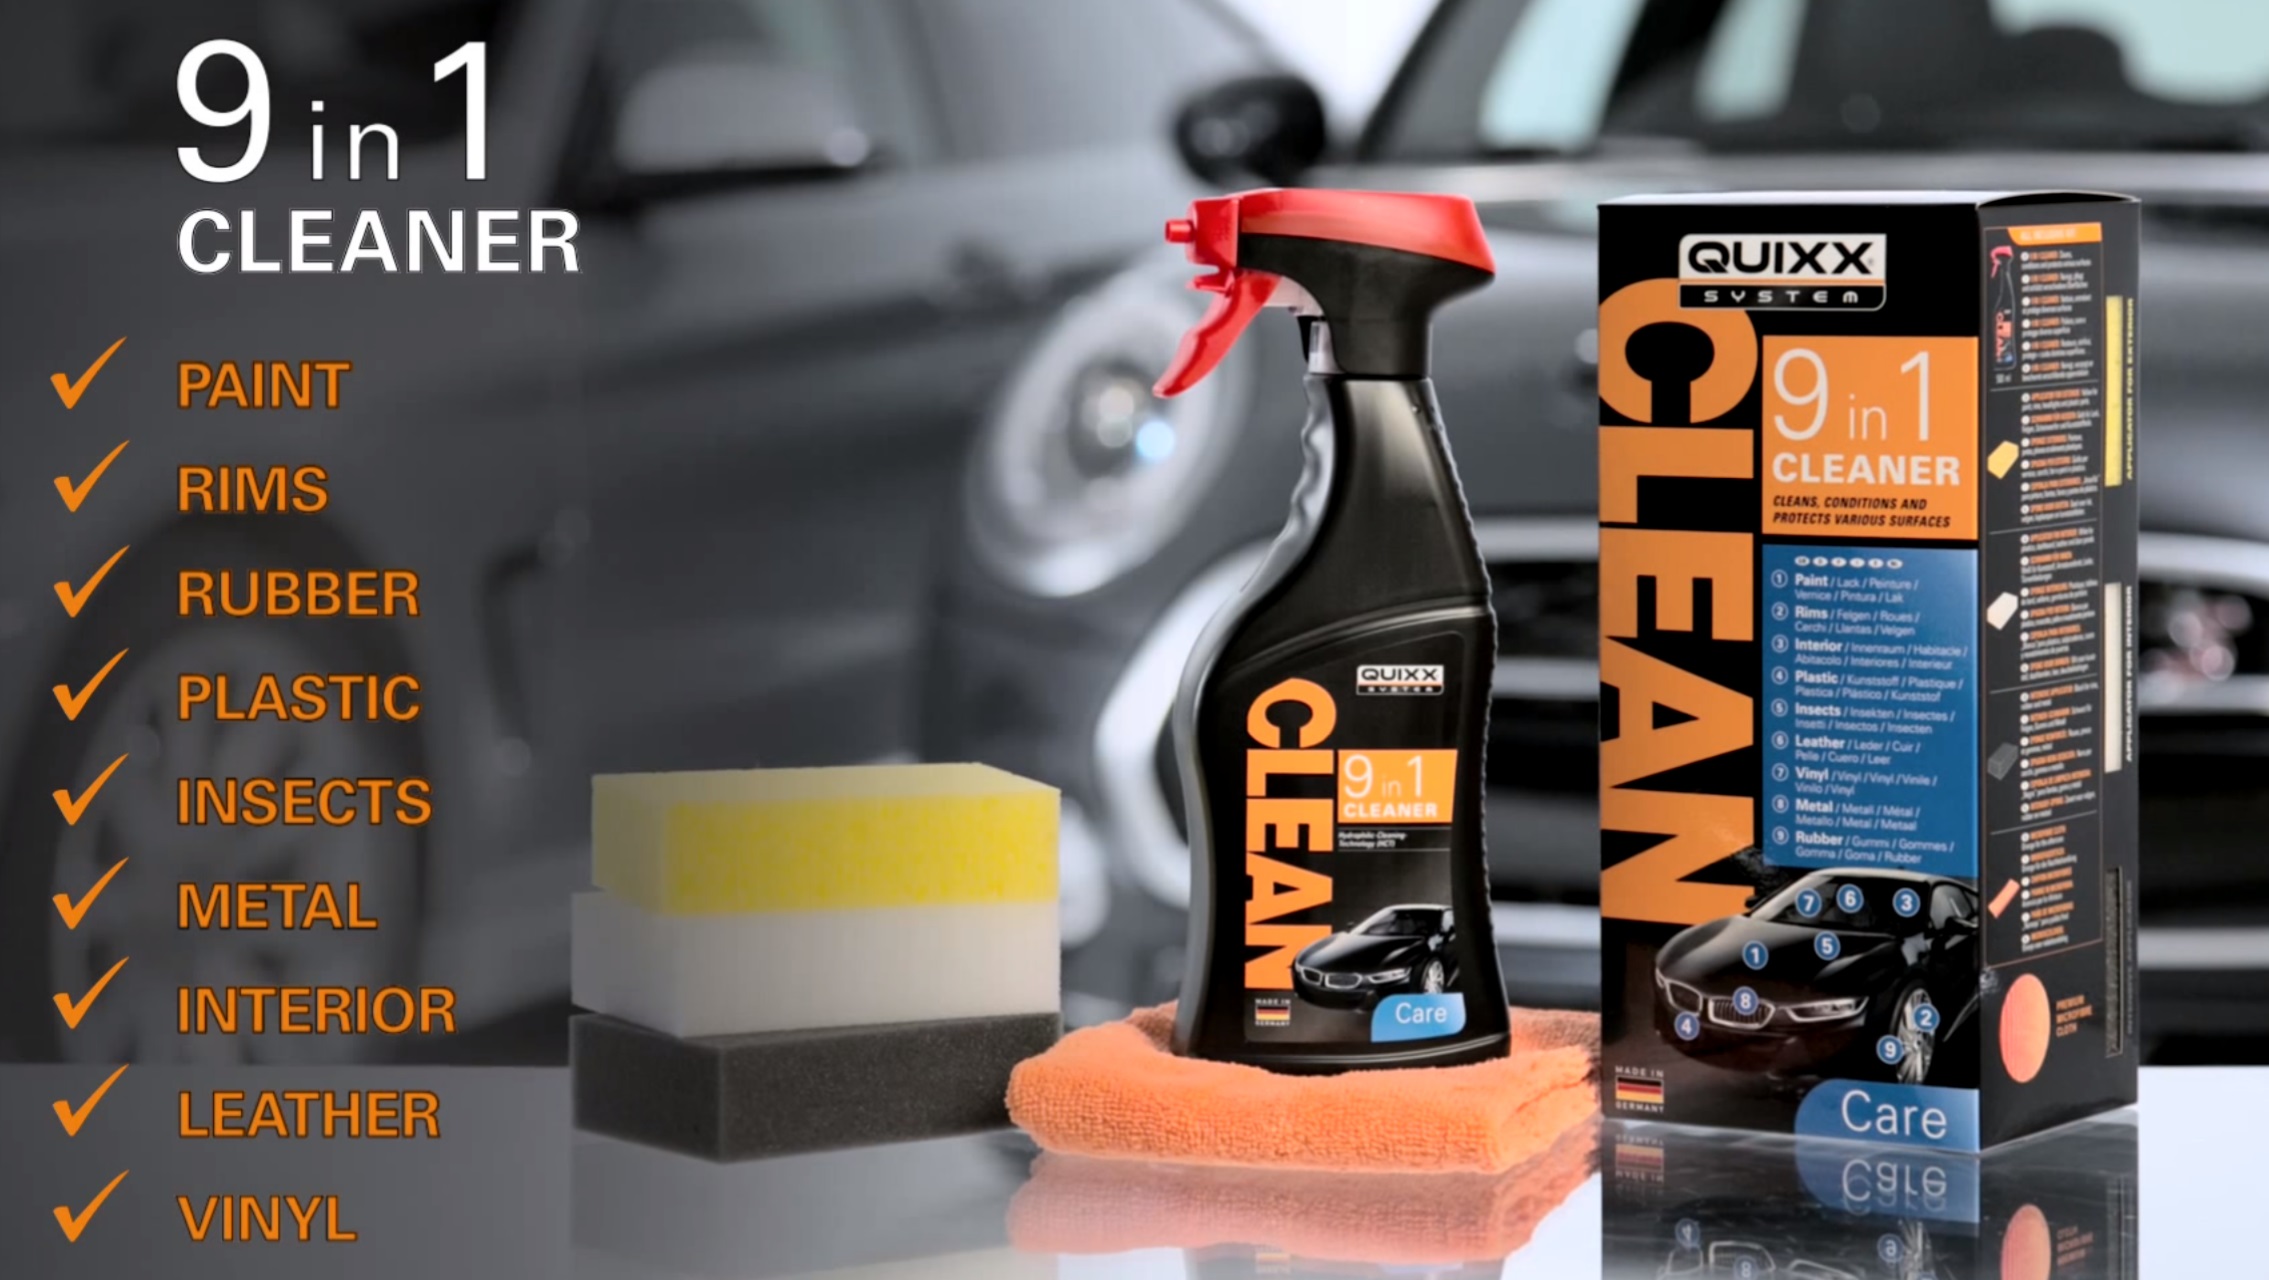 9-in-1 Cleaner